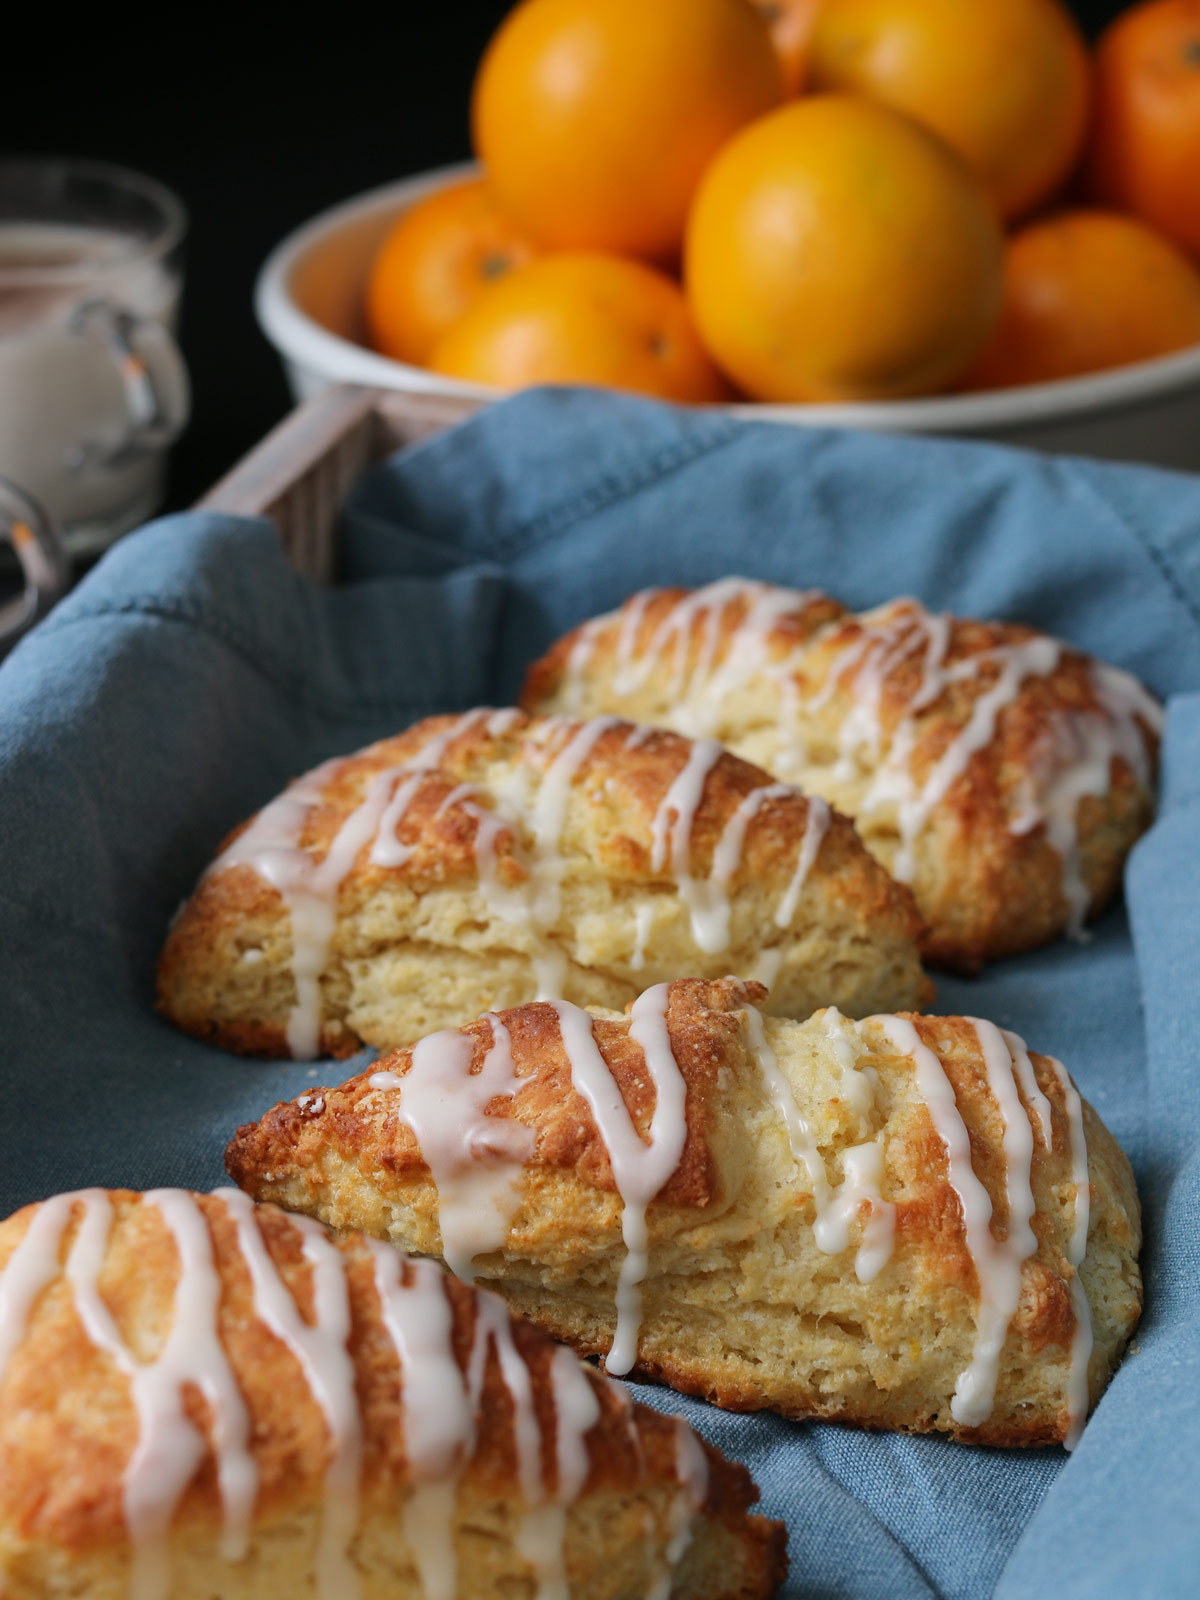 orange scones in a tray lined with a blue cloth, in front of a bowl of oranges.